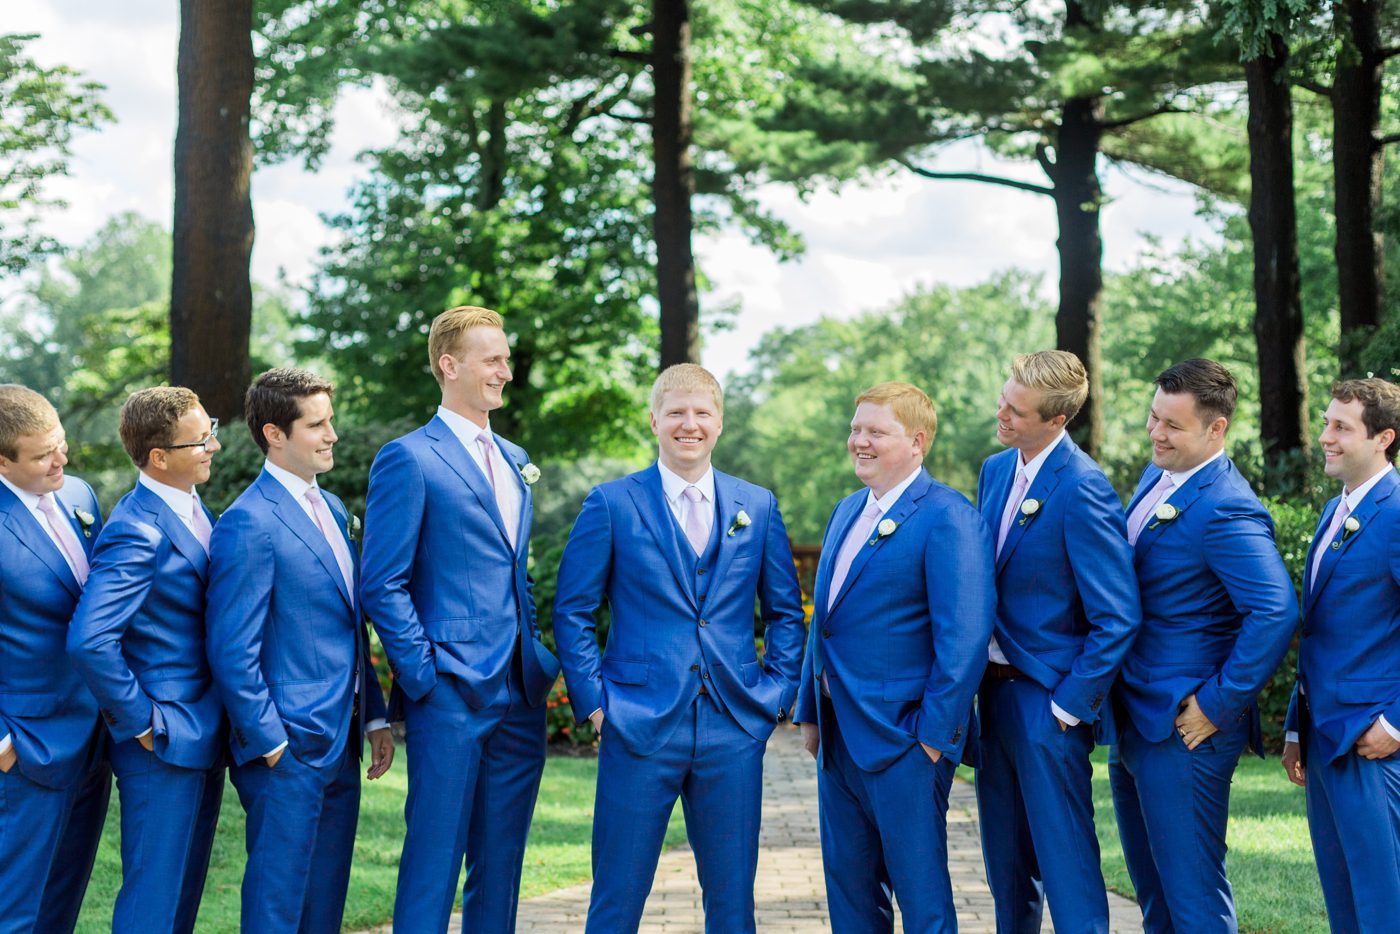 Navy blue suits from Suit Supply for the groom and groomsmen